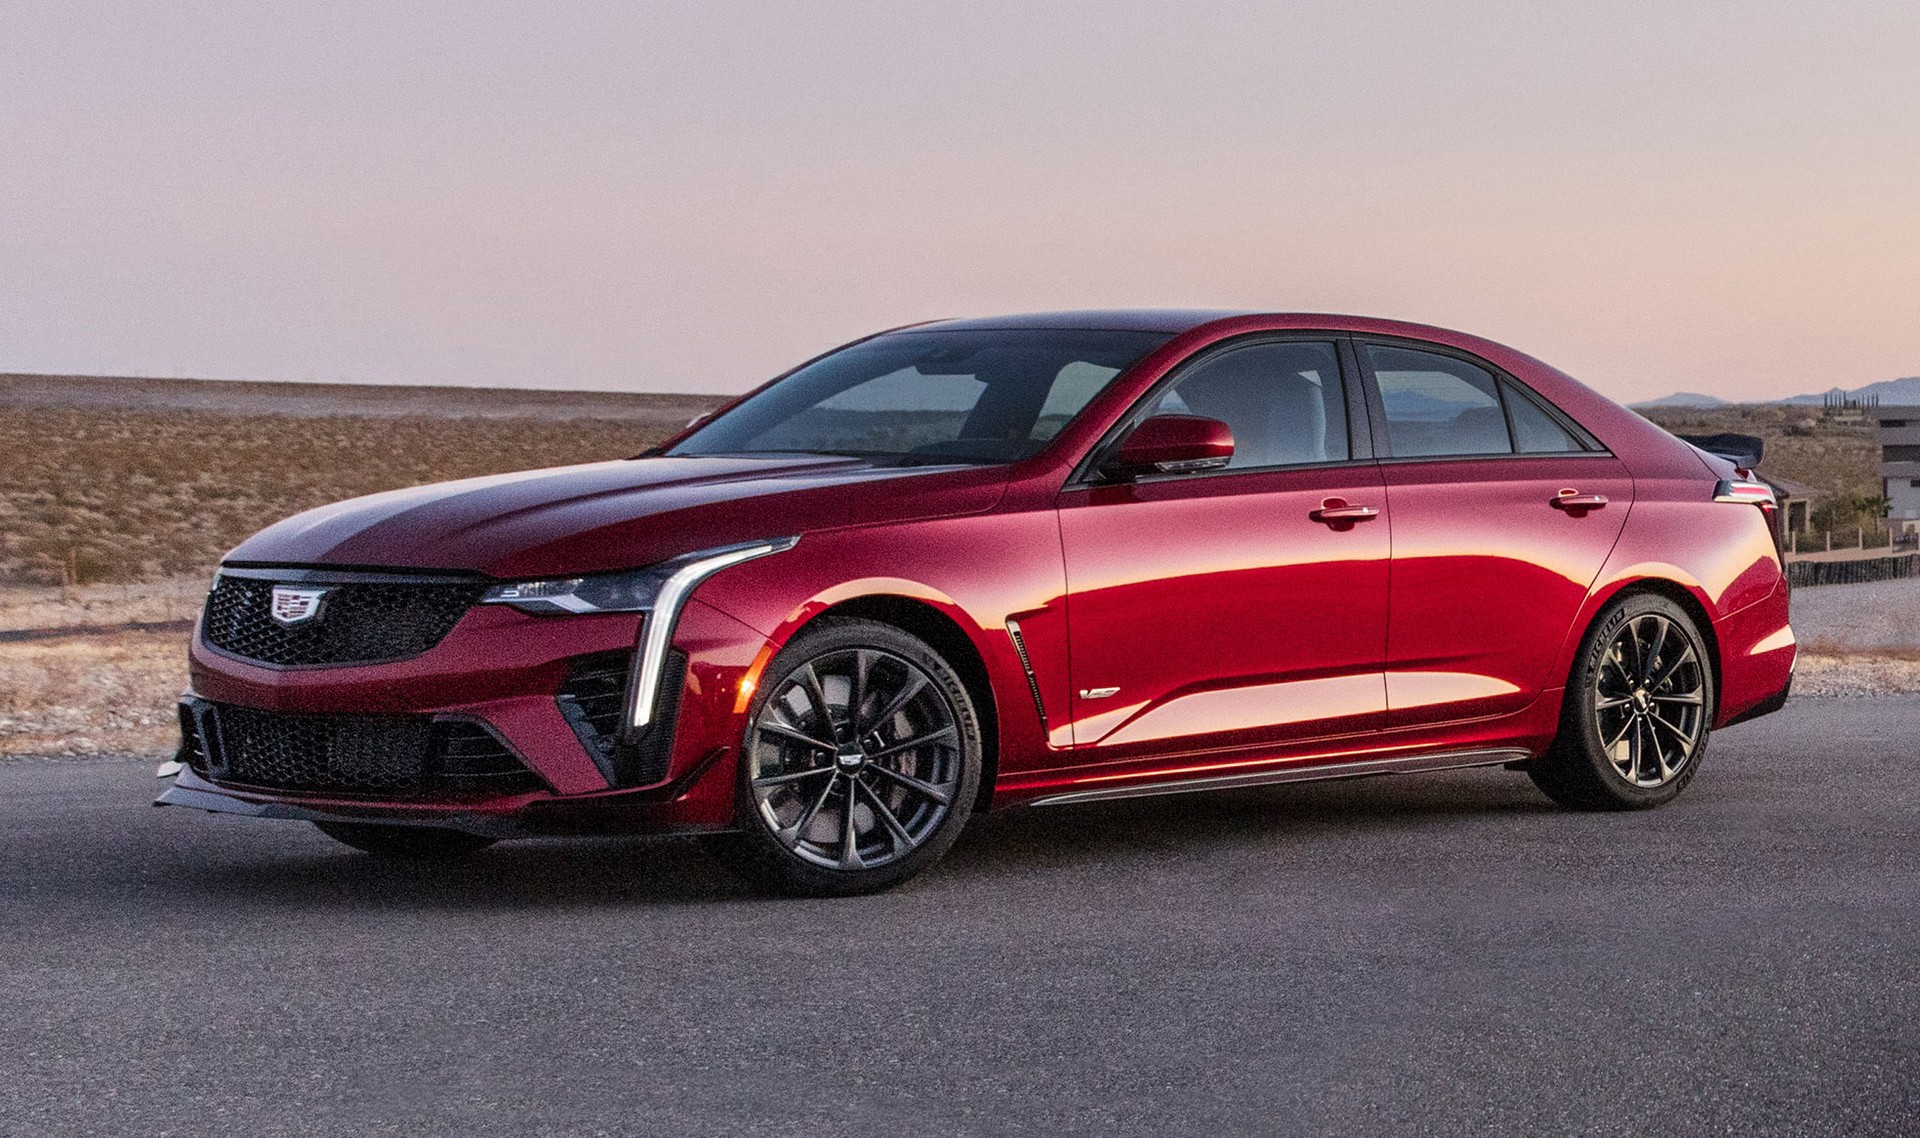 2022 Cadillac Ct4 V And Ct5 V Blackwings Shown Ahead Of Their Debut On